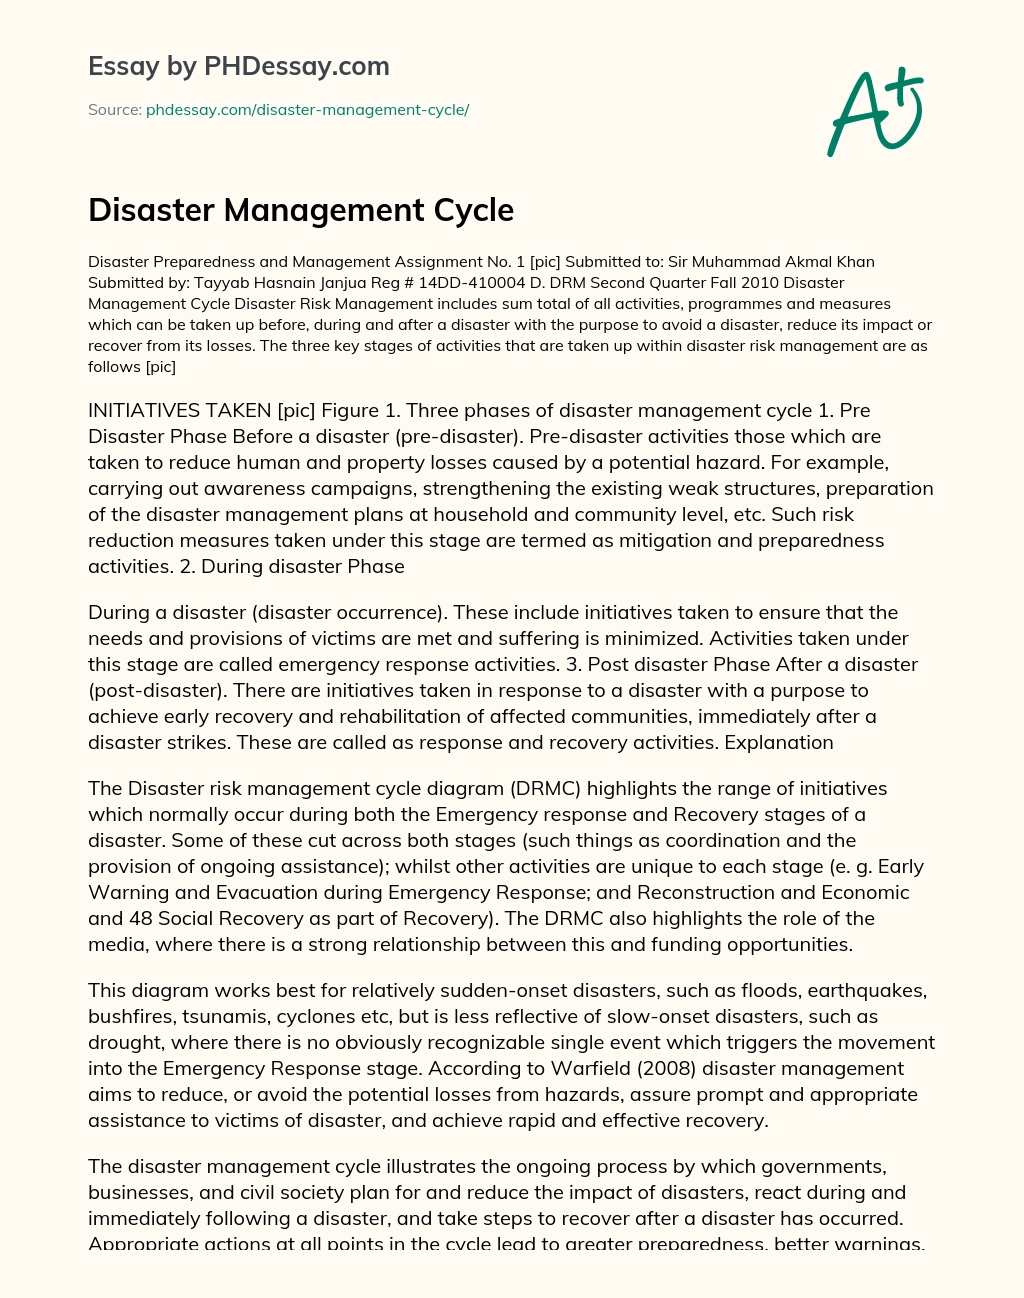 essay on disaster management cycle